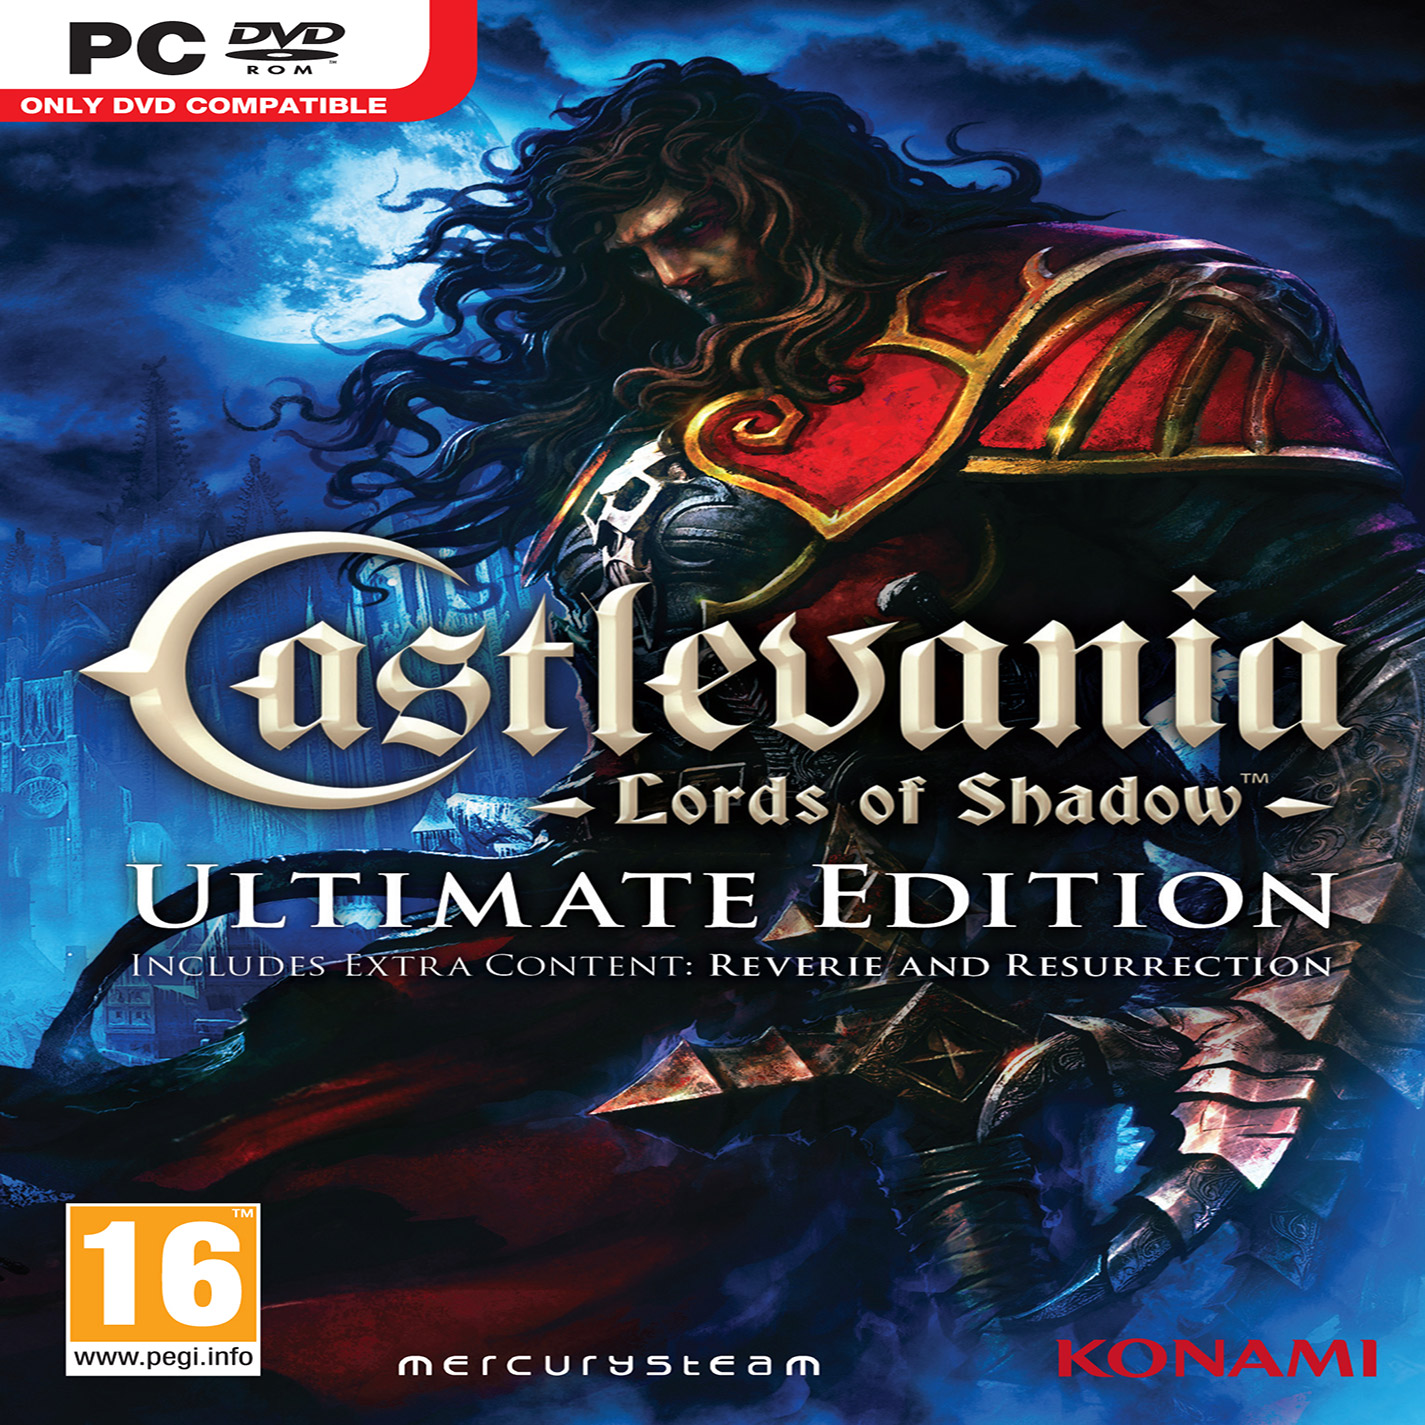 Castlevania: Lords of Shadow - Ultimate Edition - pedn CD obal